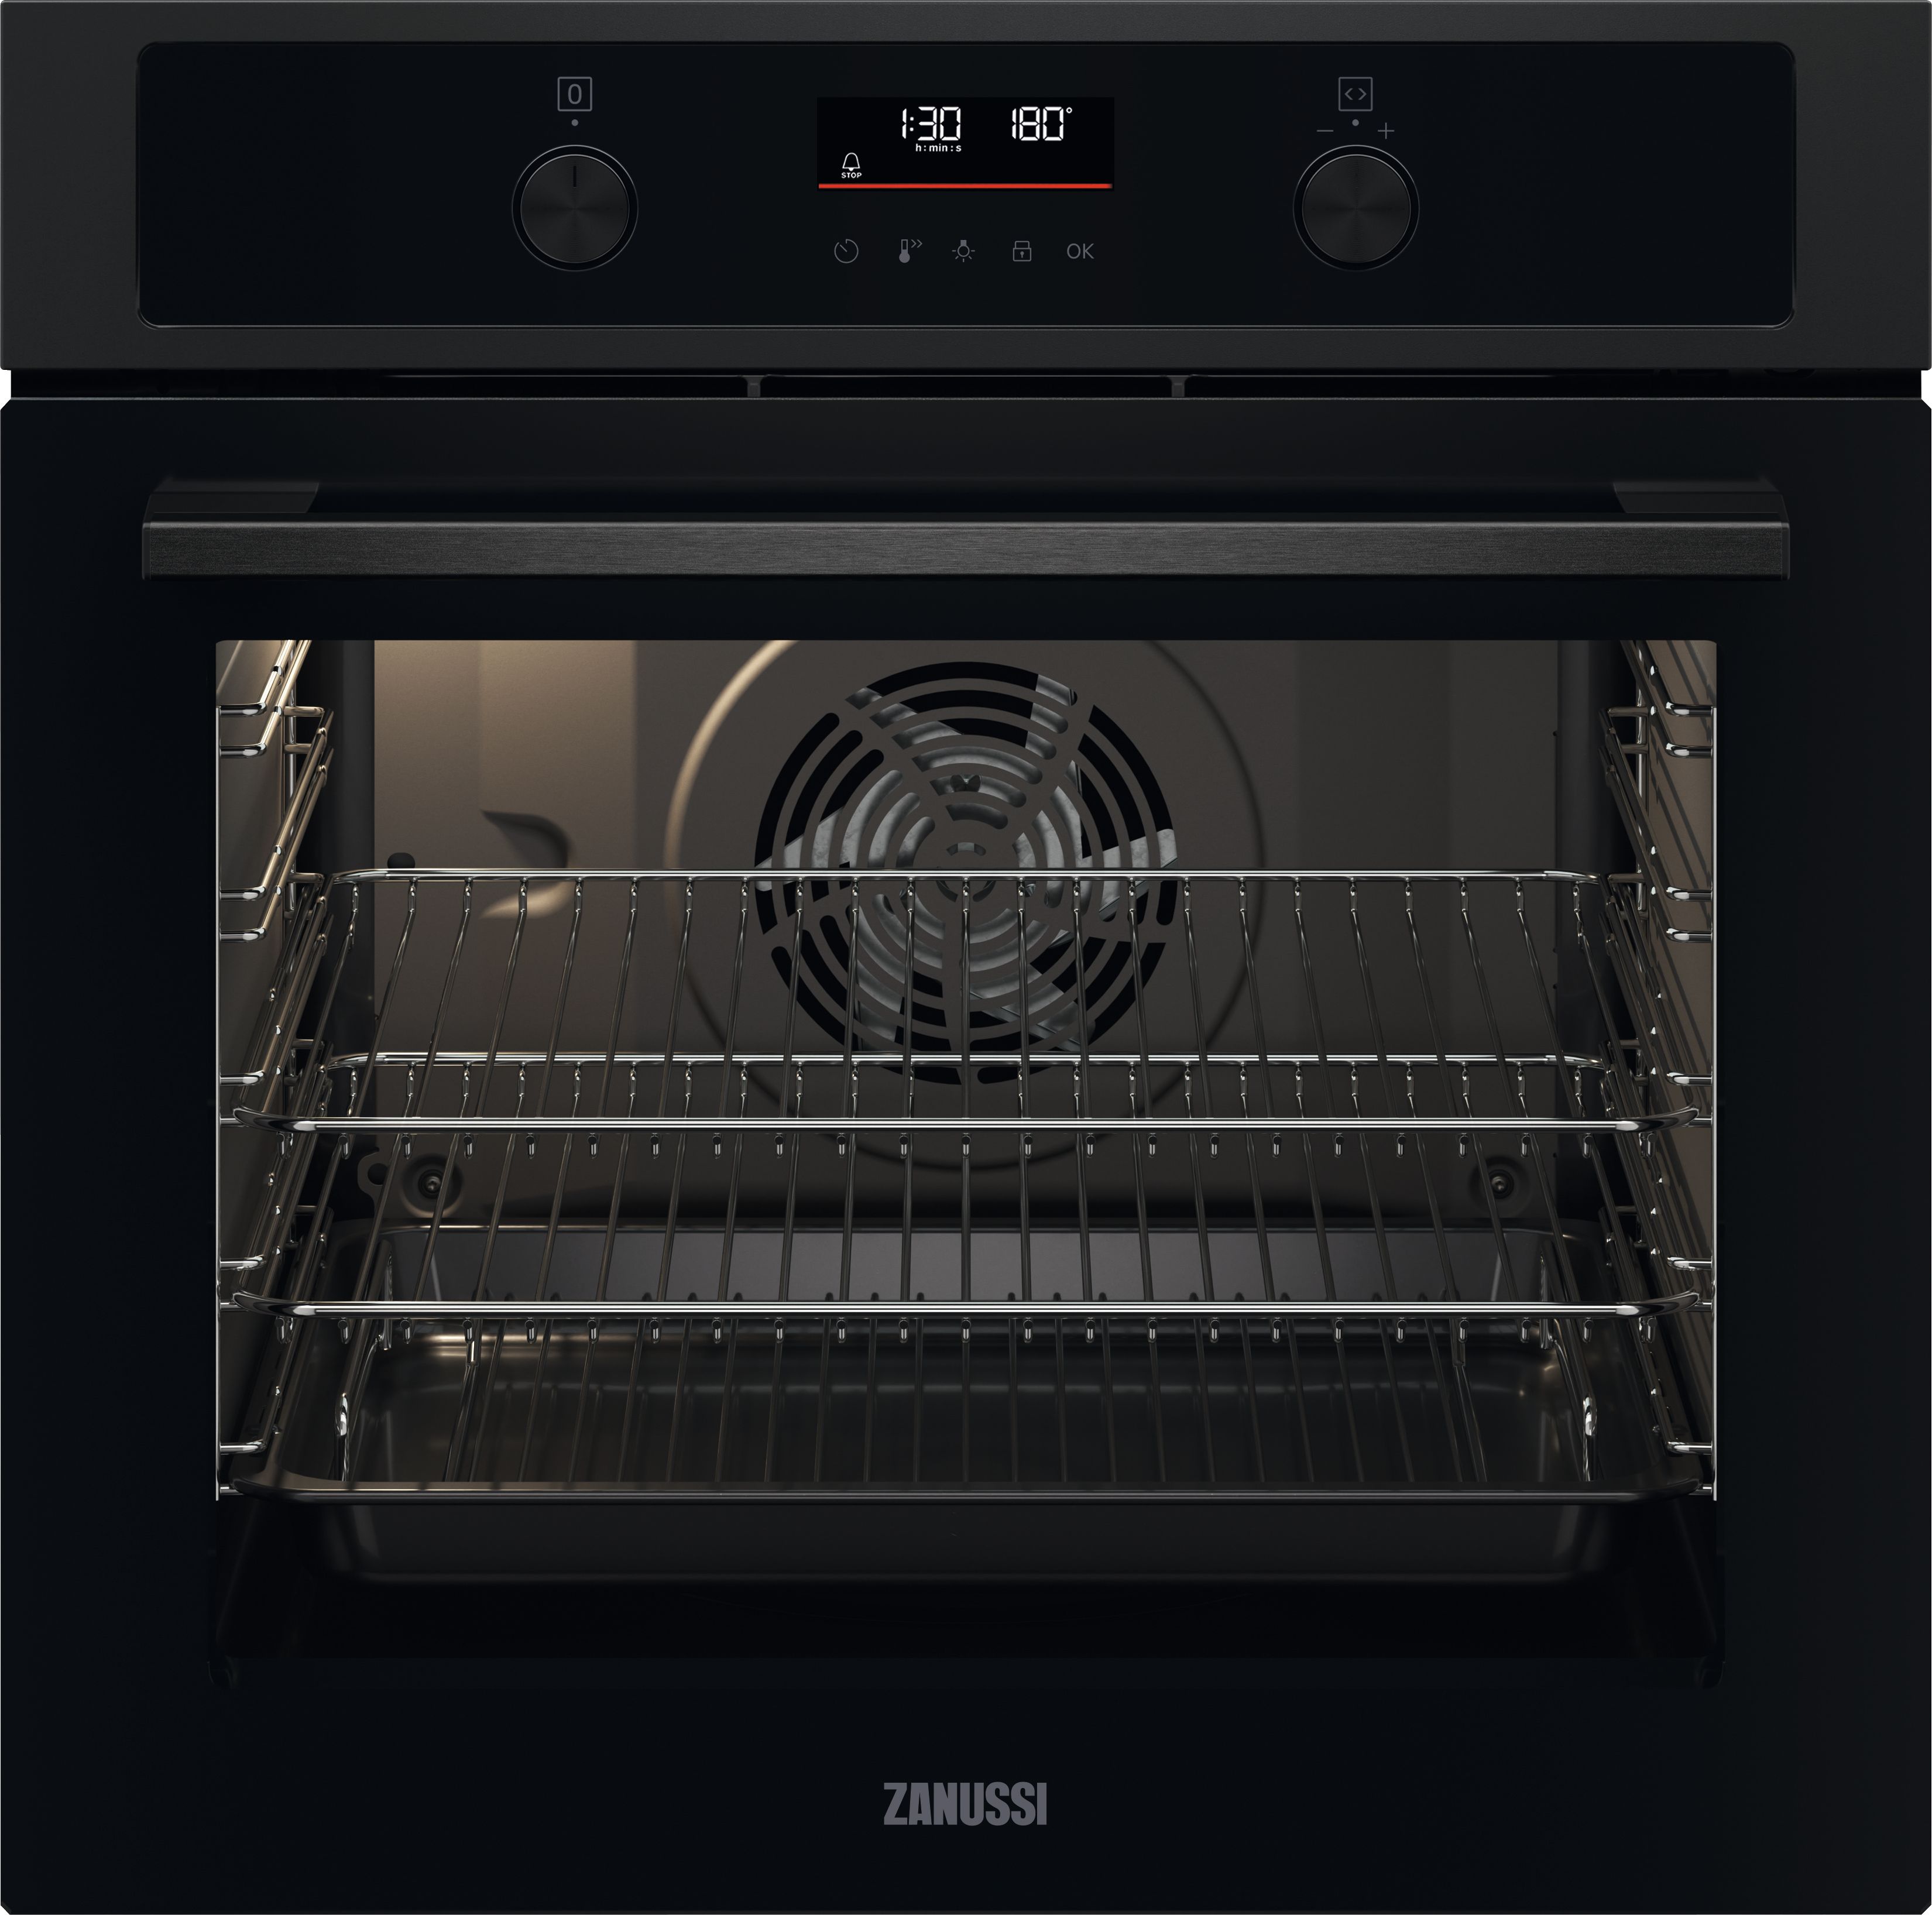 Zanussi ZOCND7KN Built In Electric Single Oven - Black - A+ Rated, Black